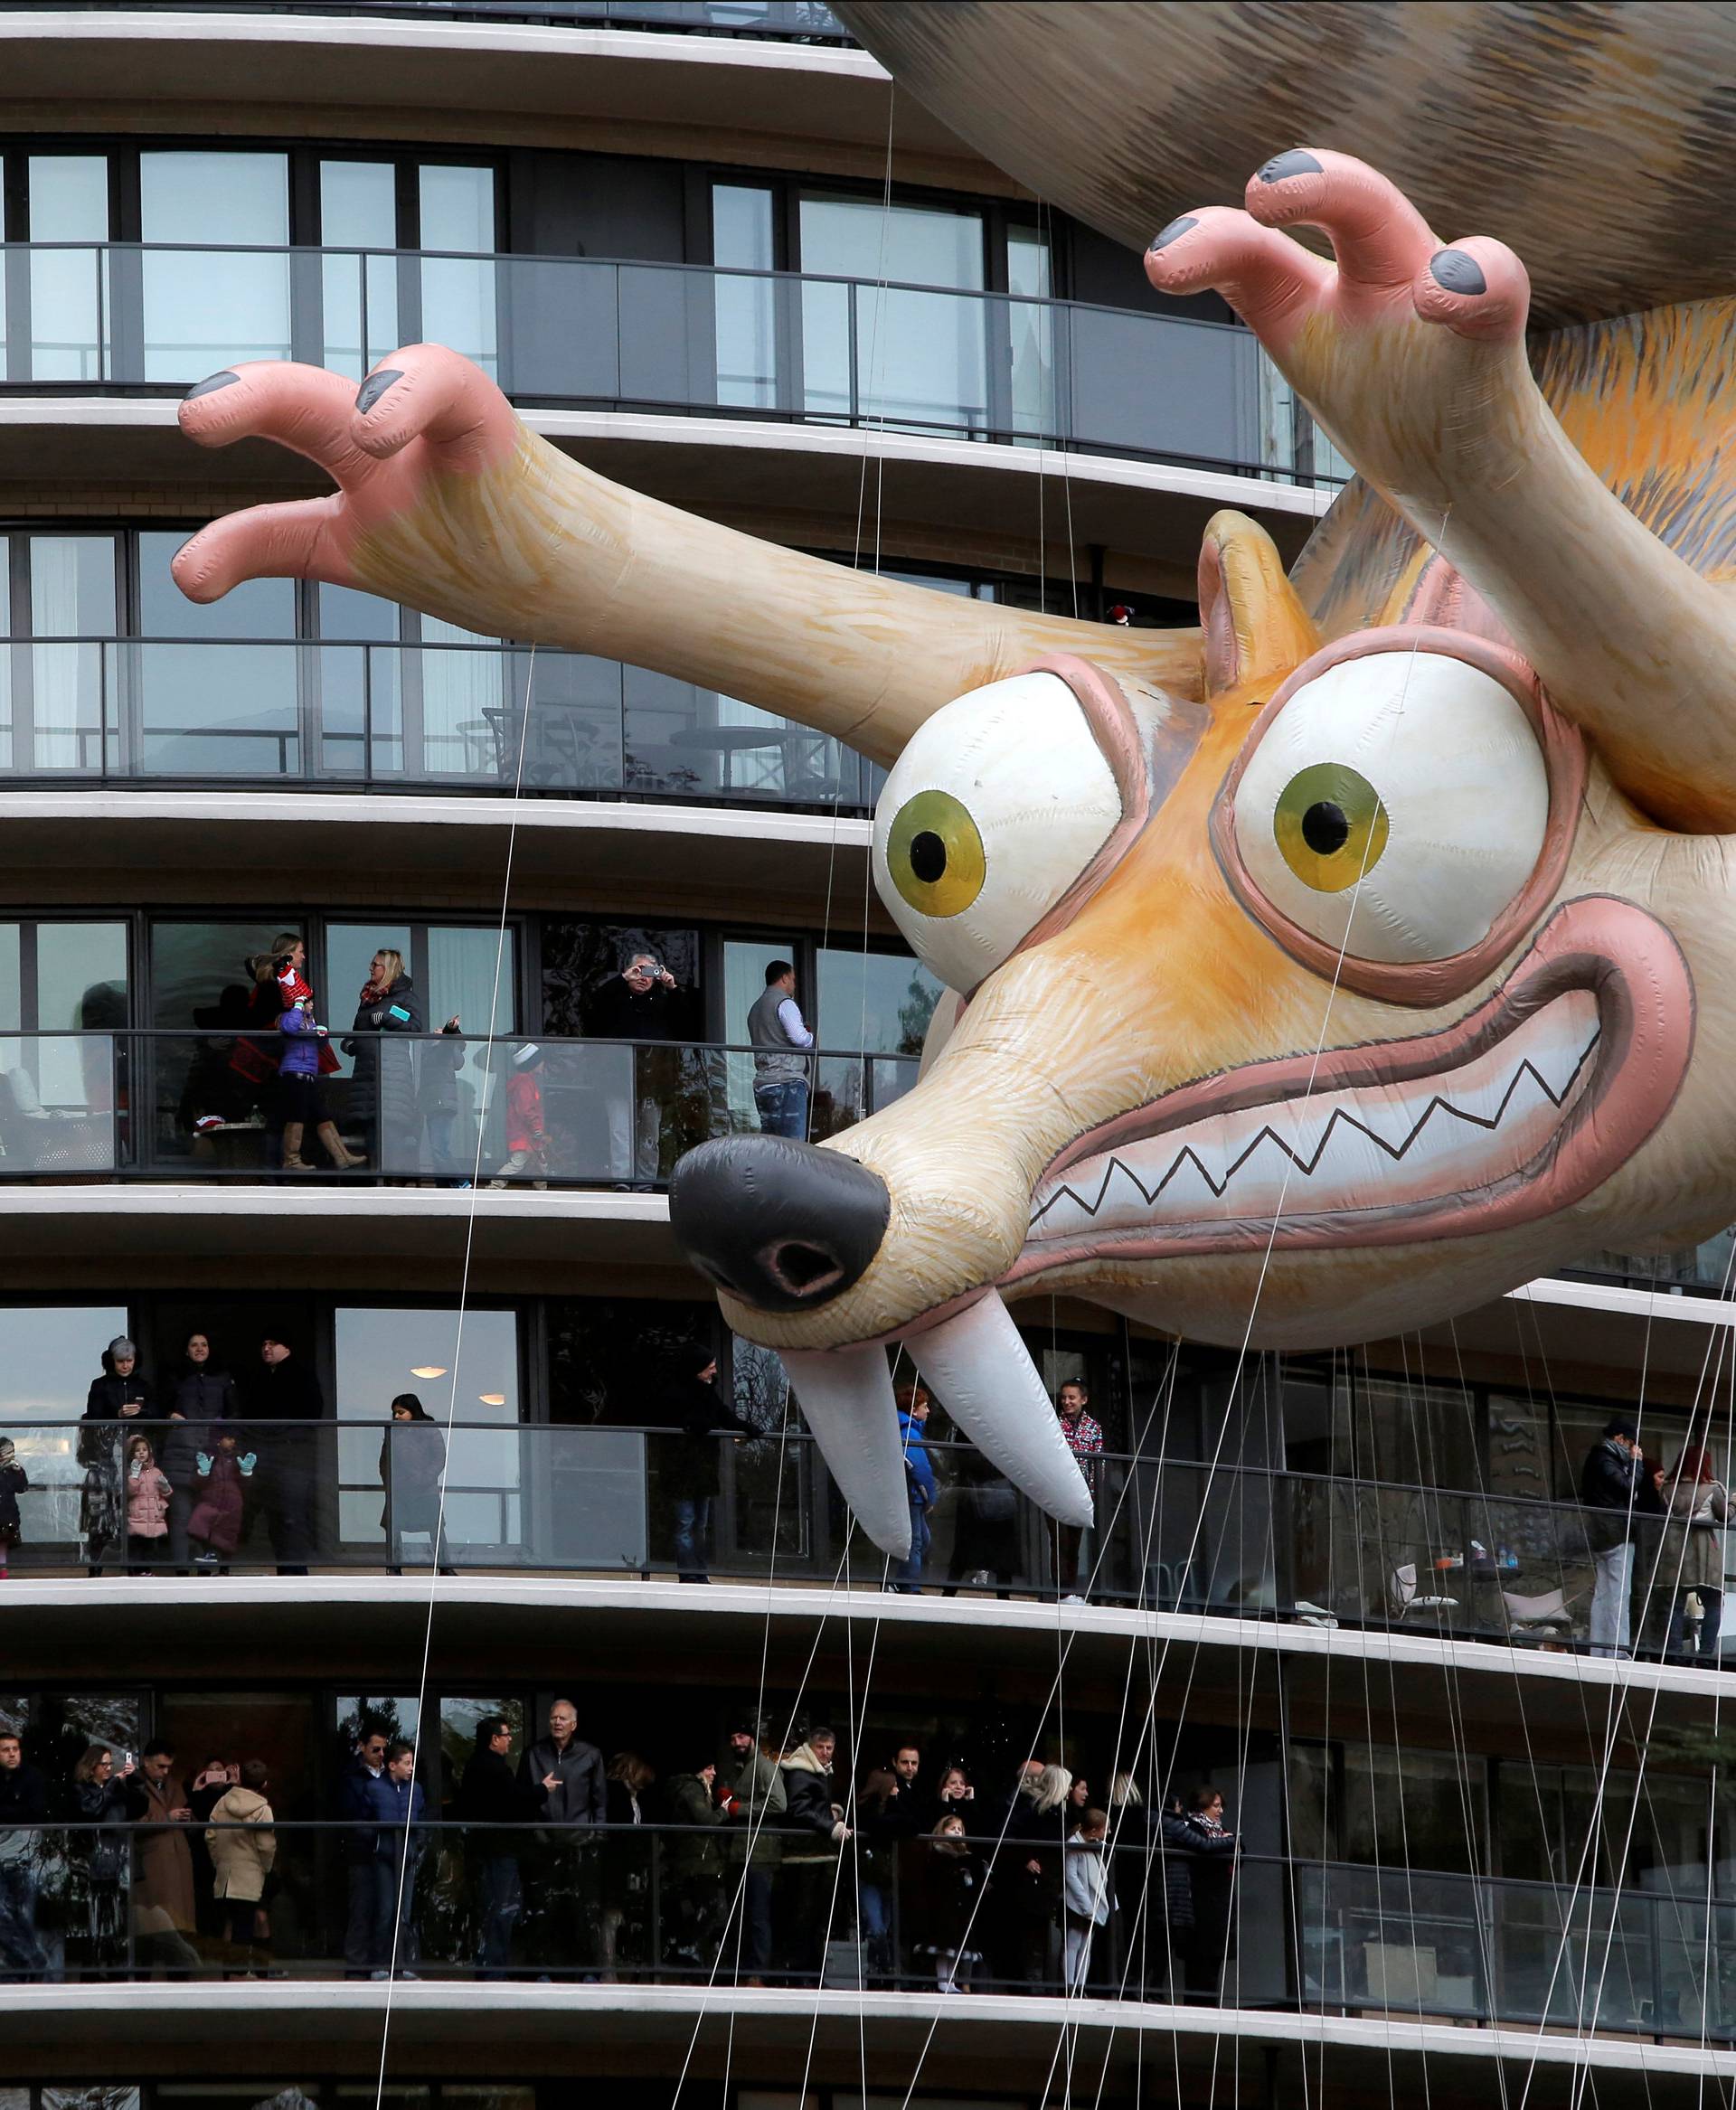 Ice Age's Scrat balloon is carried by crowds gathered on terraces along West 59th Street during the 90th Macy's Thanksgiving Day Parade in Manhattan, New York, U.S.